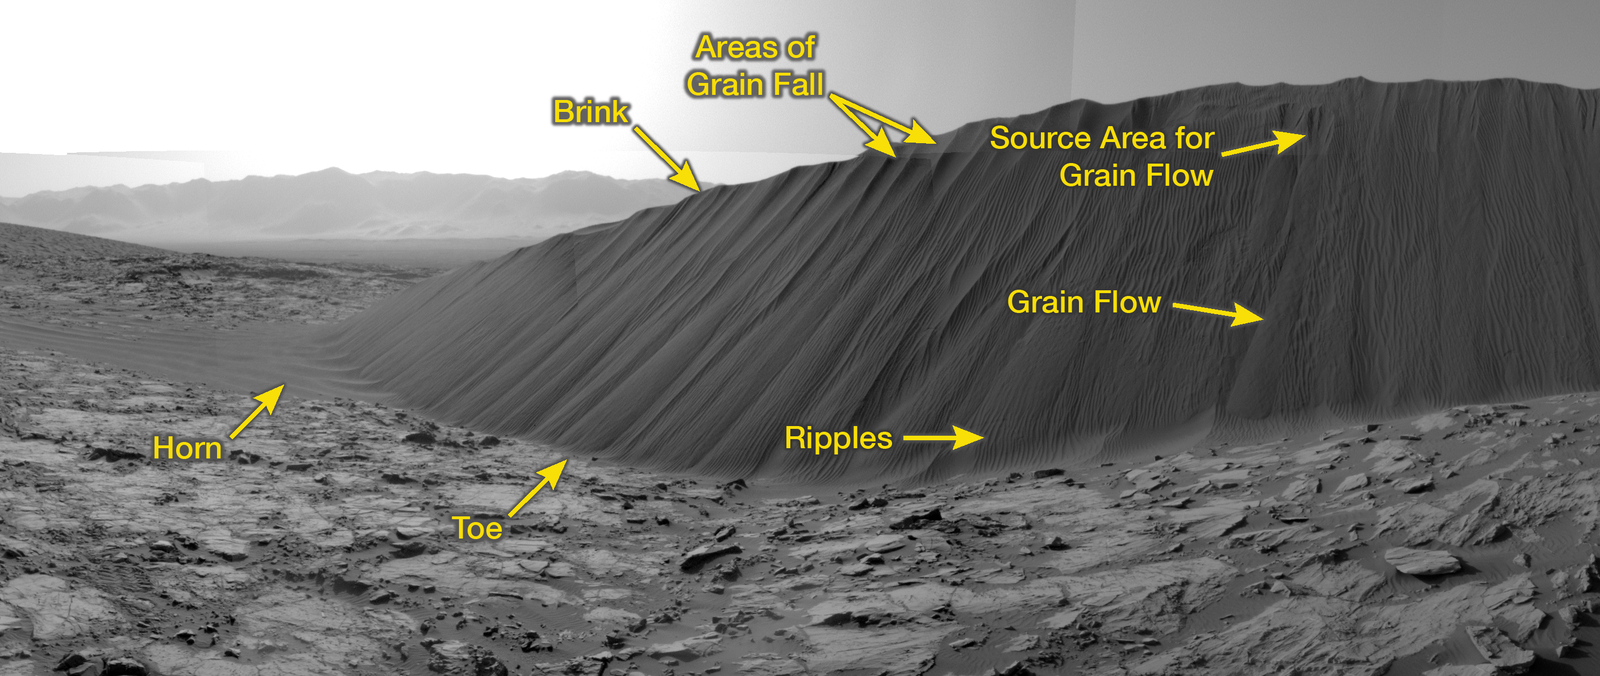 This view from NASA's Curiosity Mars Rover shows the downwind side of a dune about 13 feet high within the Bagnold Dunes field on Mars. The rover's Navigation Camera took the component images on Dec. 17, 2015. As on Earth, the downwind side of an active sand dune has a steep slope called a slip face.